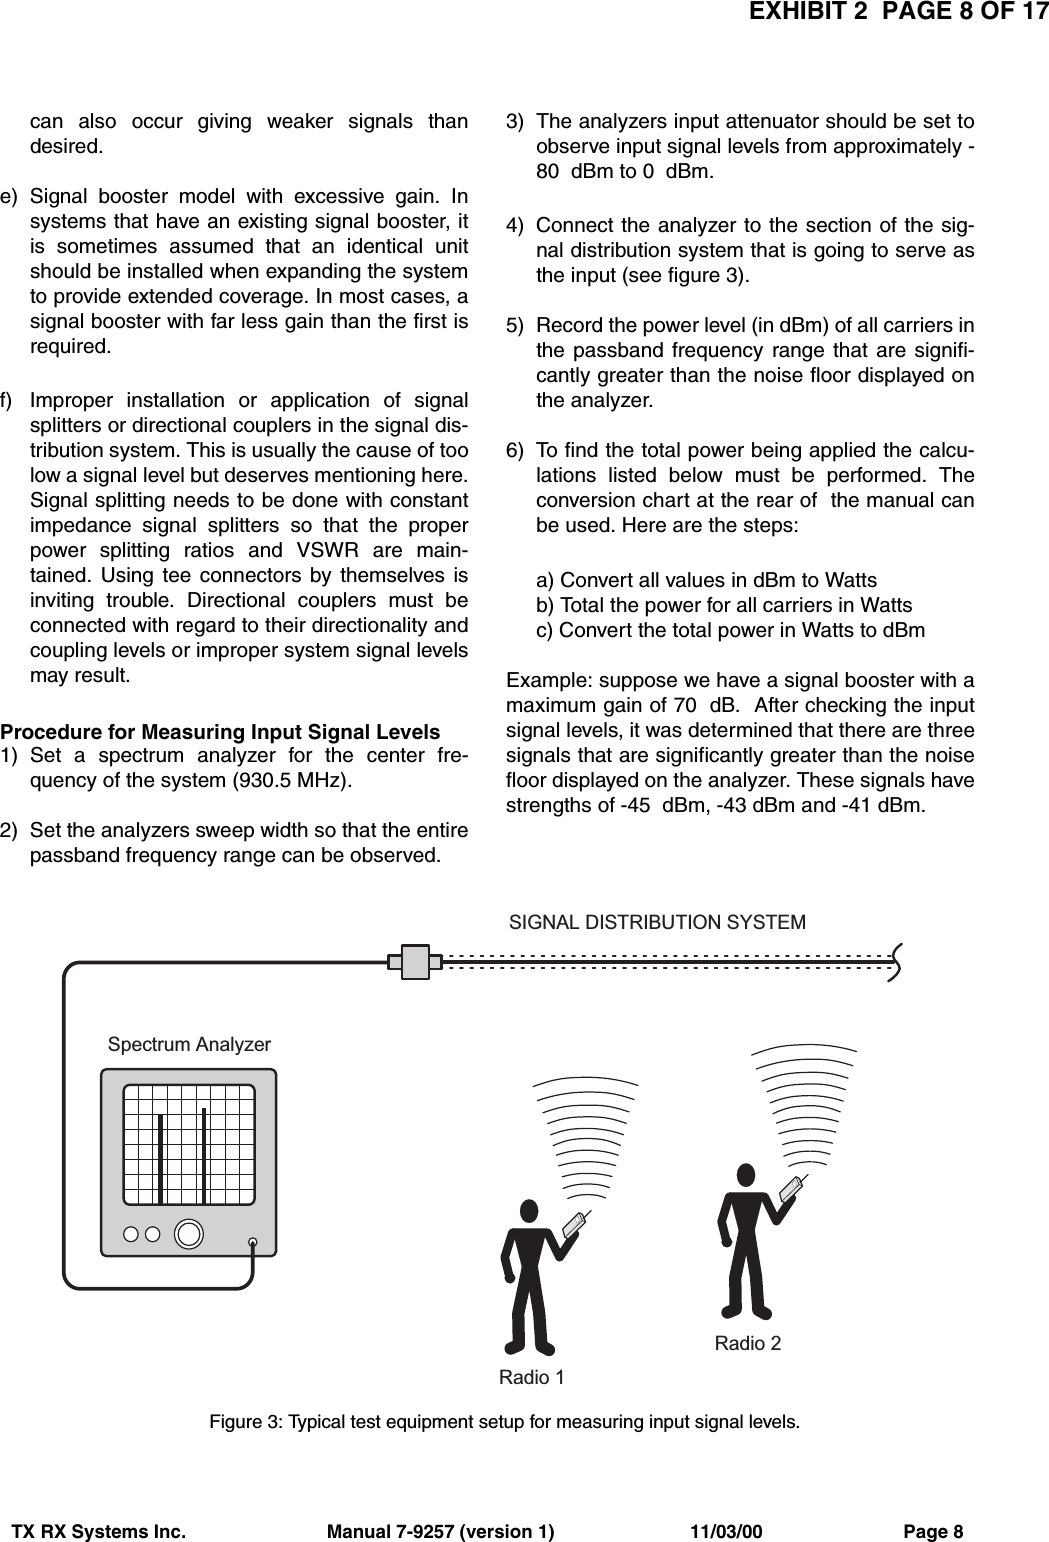 EXHIBIT 2  PAGE 8 OF 17TX RX Systems Inc.                           Manual 7-9257 (version 1)                          11/03/00                           Page 8can also occur giving weaker signals thandesired.e) Signal booster model with excessive gain. Insystems that have an existing signal booster, itis sometimes assumed that an identical unitshould be installed when expanding the systemto provide extended coverage. In most cases, asignal booster with far less gain than the first isrequired.f) Improper installation or application of signalsplitters or directional couplers in the signal dis-tribution system. This is usually the cause of toolow a signal level but deserves mentioning here.Signal splitting needs to be done with constantimpedance signal splitters so that the properpower splitting ratios and VSWR are main-tained. Using tee connectors by themselves isinviting trouble. Directional couplers must beconnected with regard to their directionality andcoupling levels or improper system signal levelsmay result.Procedure for Measuring Input Signal Levels 1) Set a spectrum analyzer for the center fre-quency of the system (930.5 MHz).2) Set the analyzers sweep width so that the entirepassband frequency range can be observed.3) The analyzers input attenuator should be set toobserve input signal levels from approximately -80  dBm to 0  dBm.4) Connect the analyzer to the section of the sig-nal distribution system that is going to serve asthe input (see figure 3).5) Record the power level (in dBm) of all carriers inthe passband frequency range that are signifi-cantly greater than the noise floor displayed onthe analyzer.6) To find the total power being applied the calcu-lations listed below must be performed. Theconversion chart at the rear of  the manual canbe used. Here are the steps:a) Convert all values in dBm to Wattsb) Total the power for all carriers in Wattsc) Convert the total power in Watts to dBmExample: suppose we have a signal booster with amaximum gain of 70  dB.  After checking the inputsignal levels, it was determined that there are threesignals that are significantly greater than the noisefloor displayed on the analyzer. These signals havestrengths of -45  dBm, -43 dBm and -41 dBm. S p e c t r u m   A n a l y z e rR a d i o   1R a d i o   2S I G N A L   D I S T R I B U T I O N   S Y S T E MFigure 3: Typical test equipment setup for measuring input signal levels.